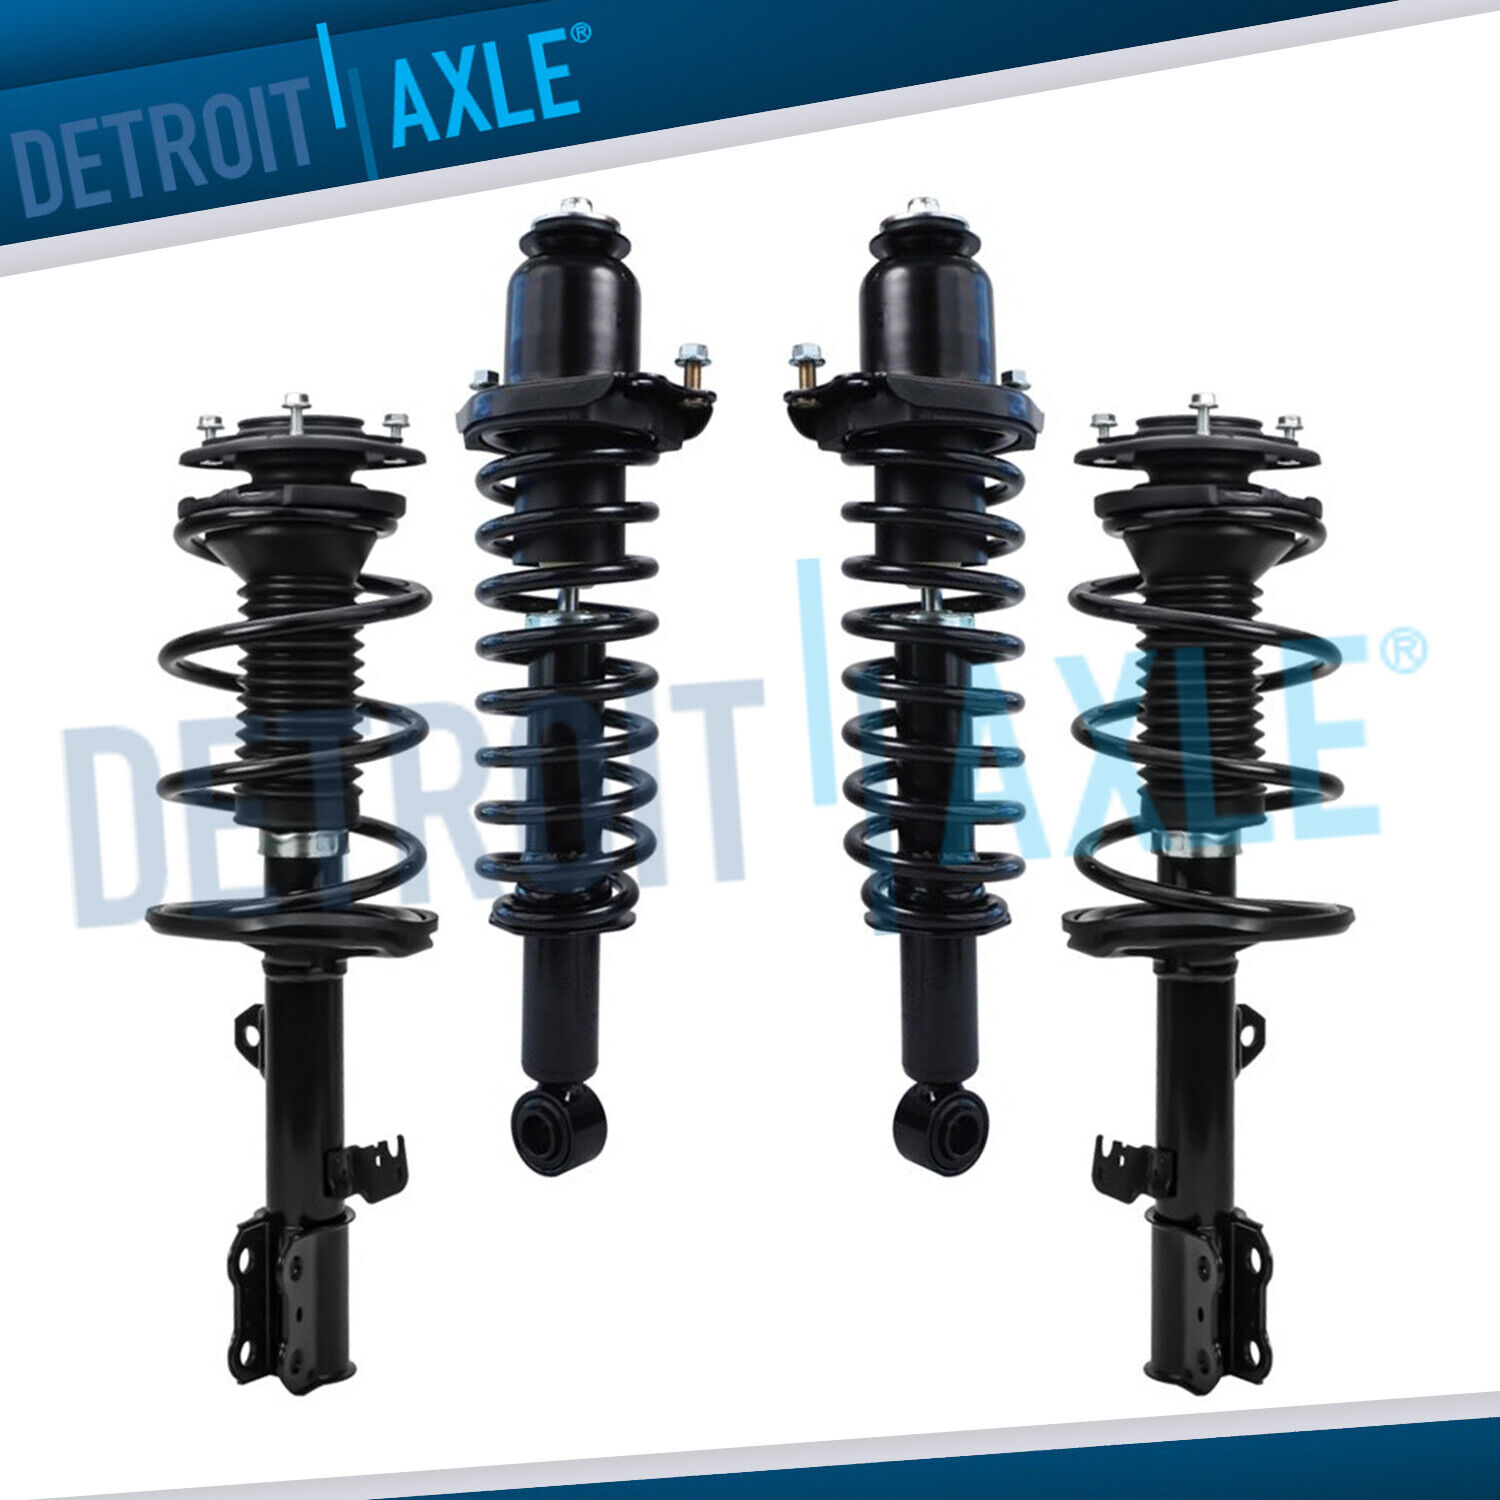 4pc Front and Rear Struts for 2003 2004 2005 2006 2007 2008 Toyota Corolla 1.8L